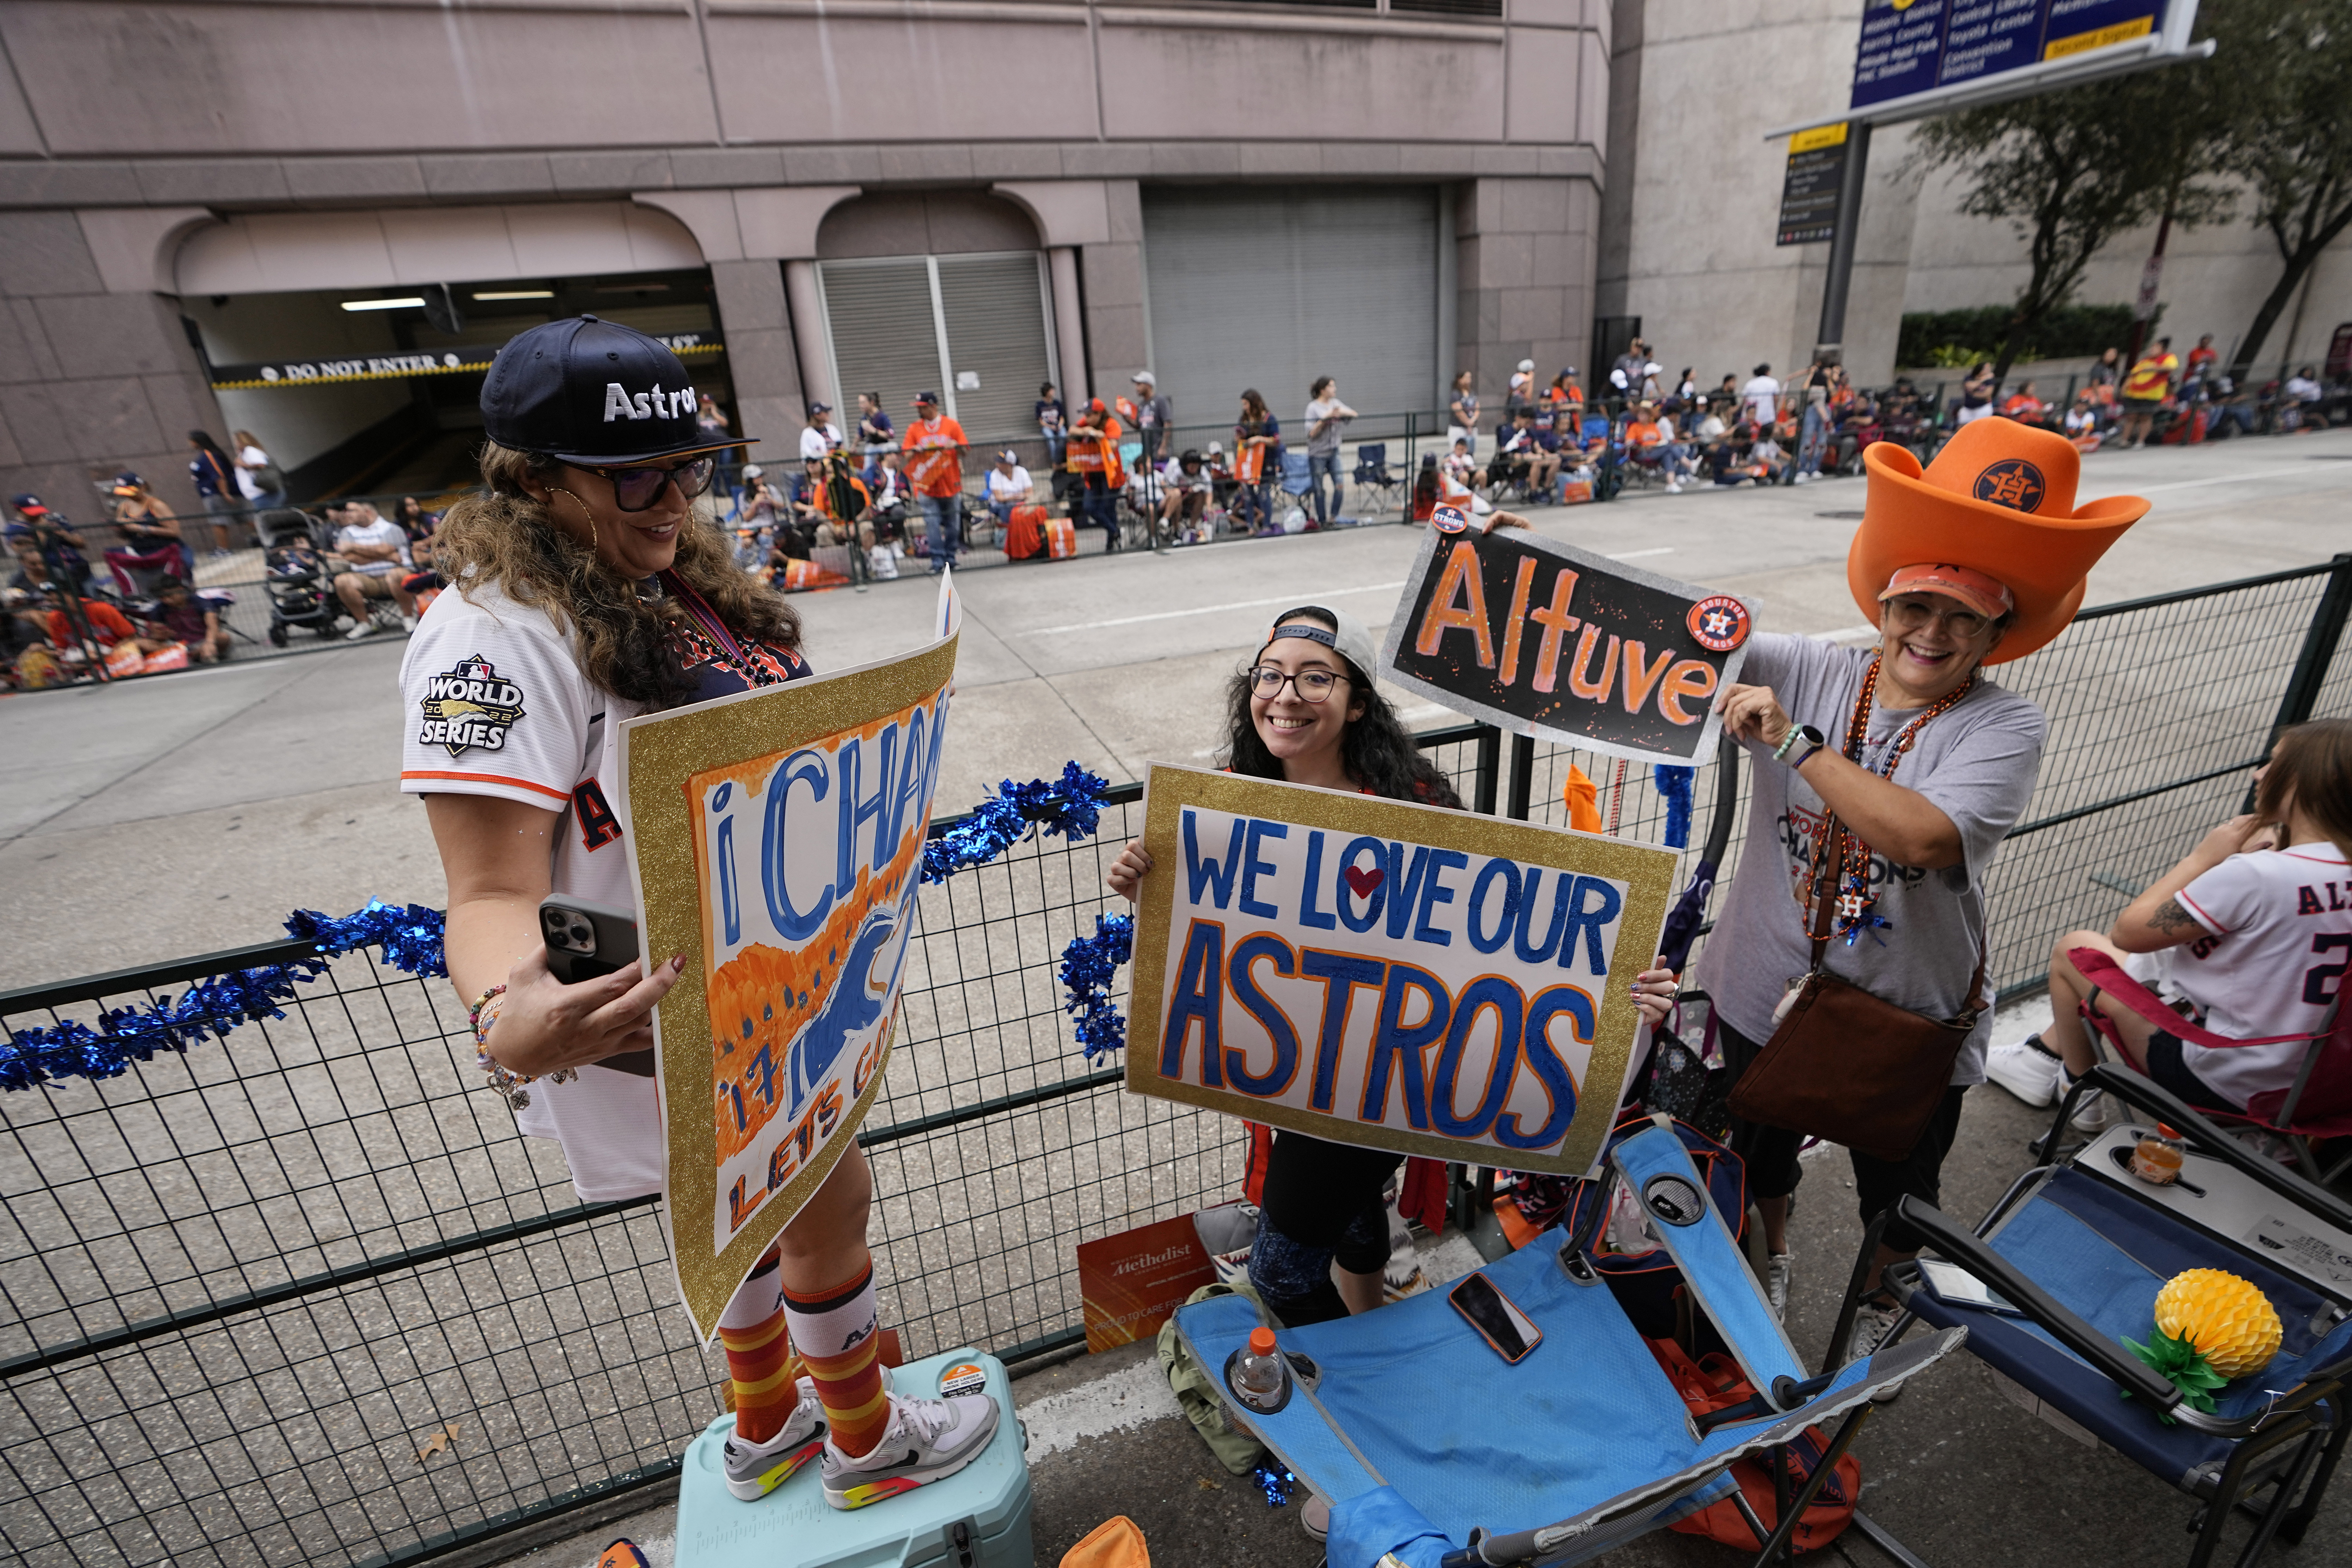 Houston Astros' World Series victory parade route extended to accommodate  fans - Houston Business Journal